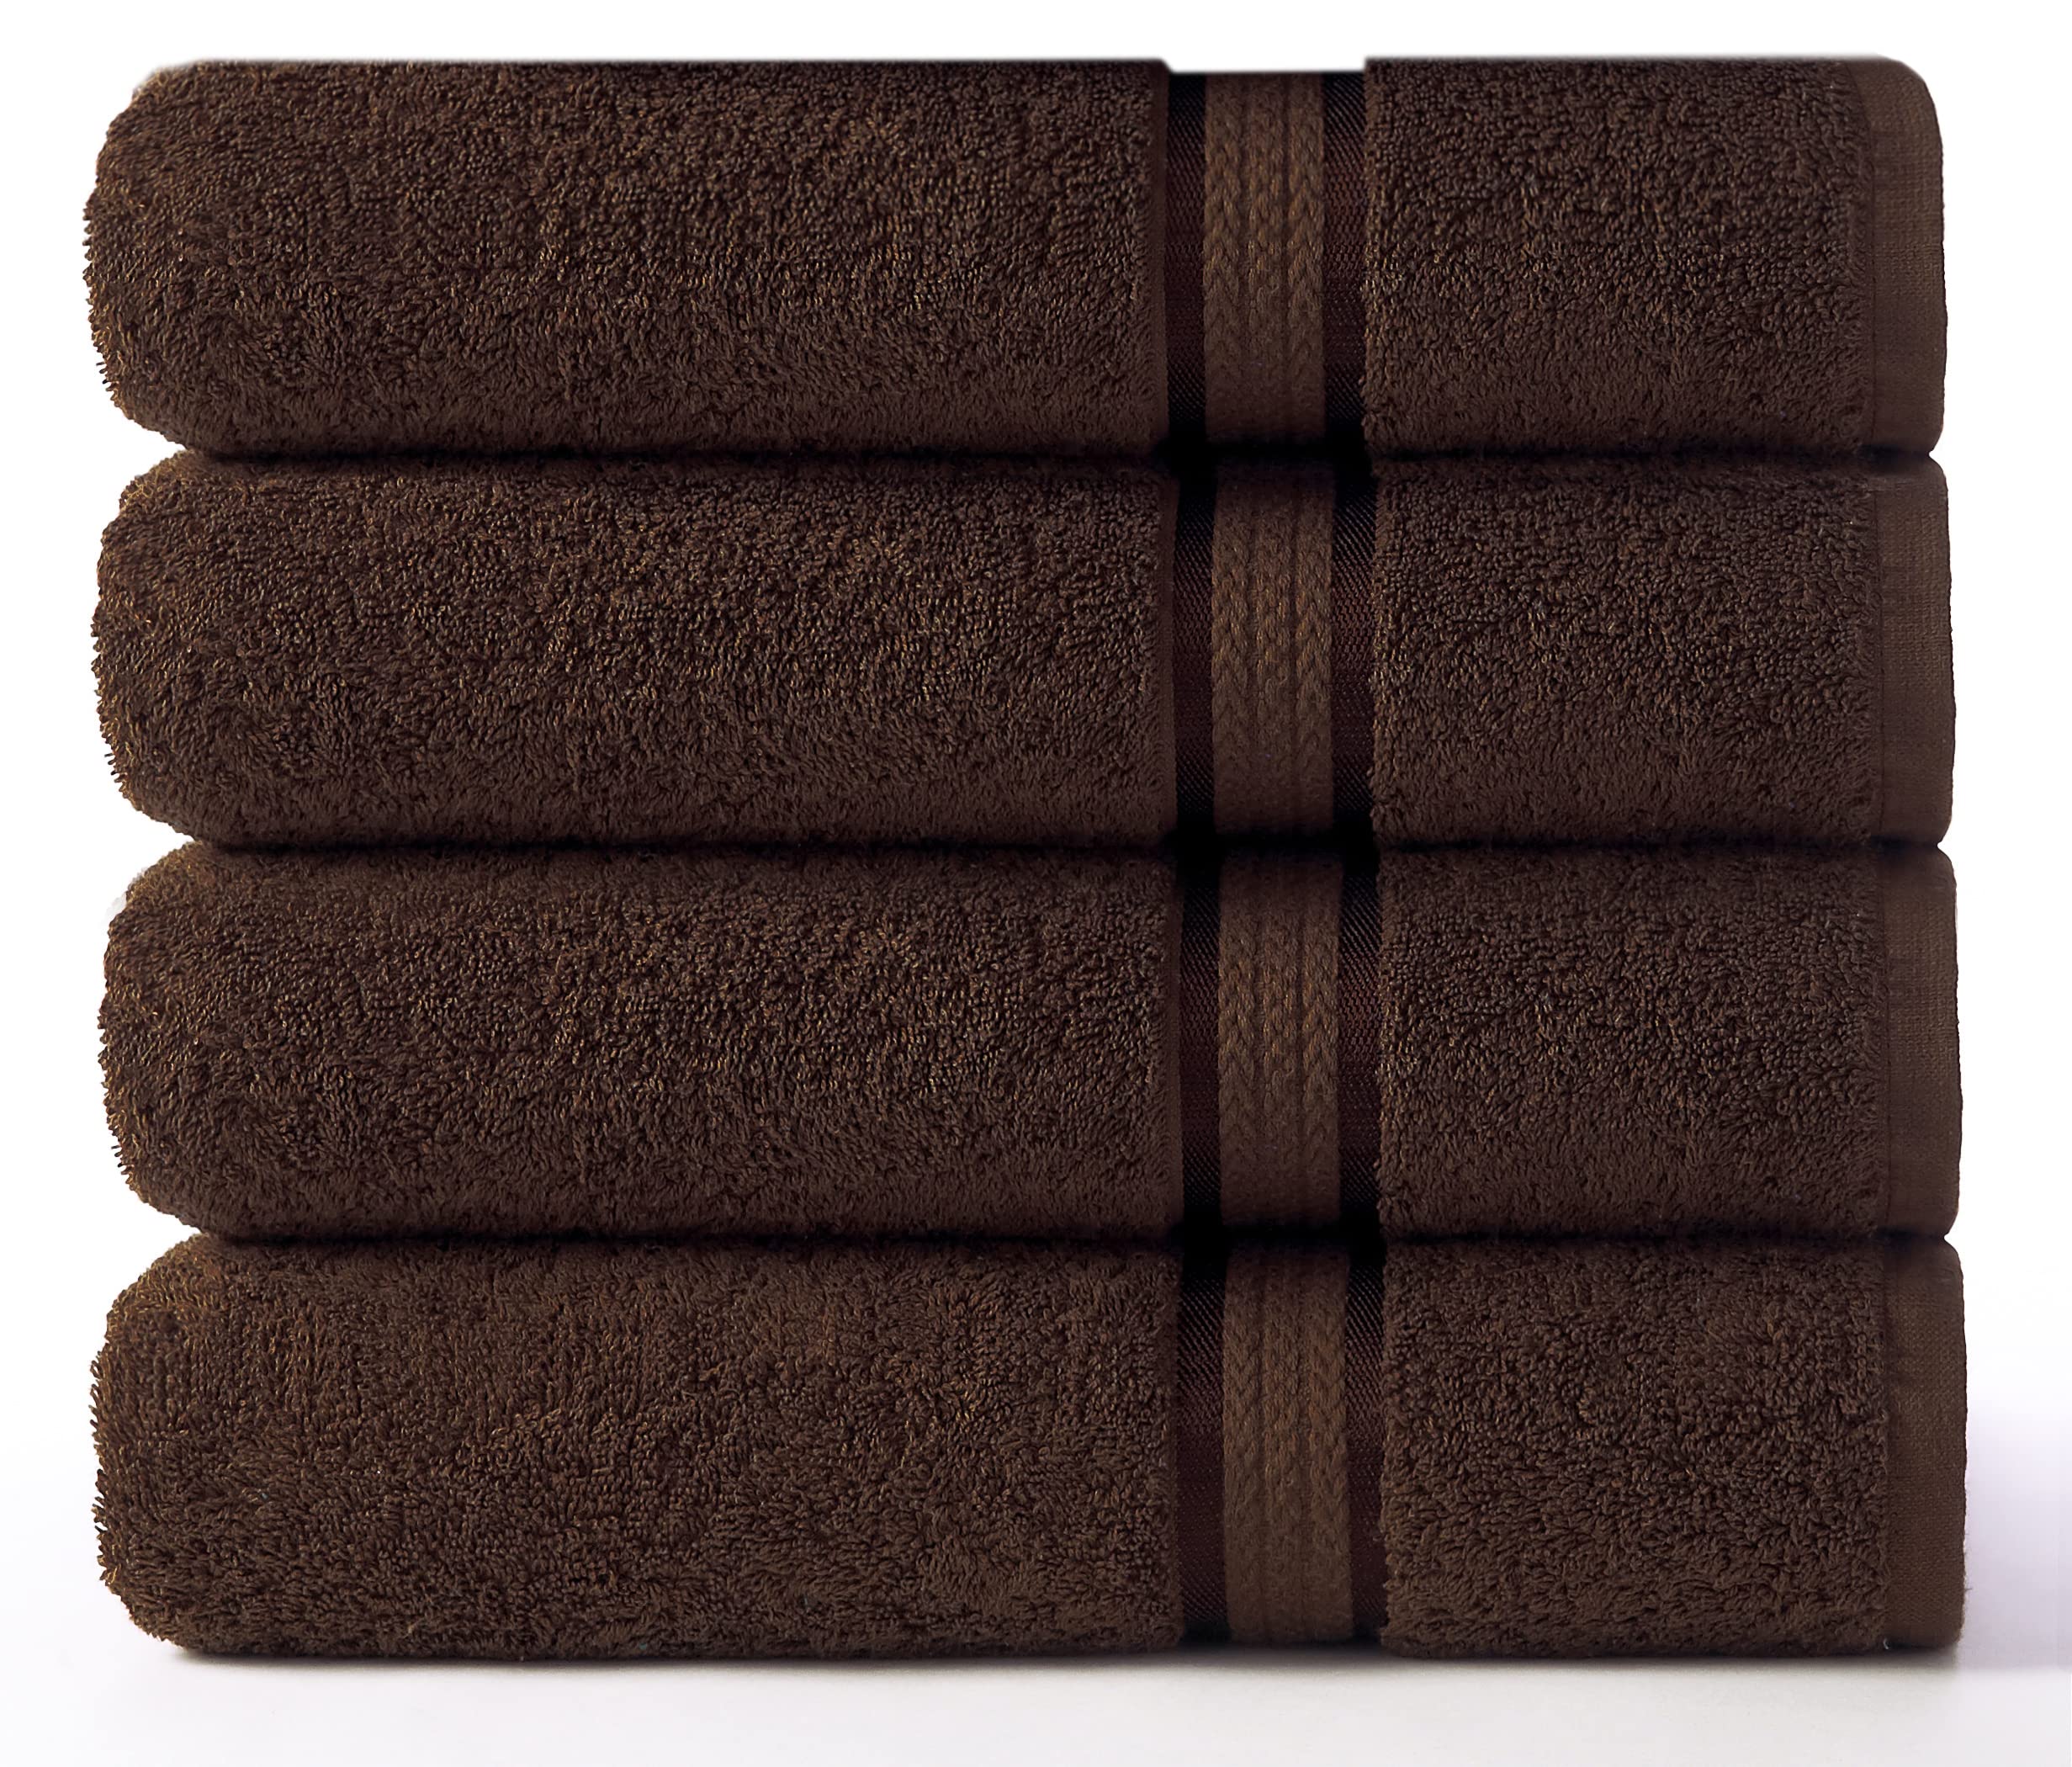 Book Cover COTTON CRAFT Ultra Soft Oversized Bath Towels - 4 Pack Extra Large Bath Towels - 30x54 - Absorbent Everyday Luxury Hotel Spa Gym Shower Beach Pool Camp Dorm - 100% Cotton - Easy Care - Chocolate Brown 4 Pack Bath Towels Chocolate